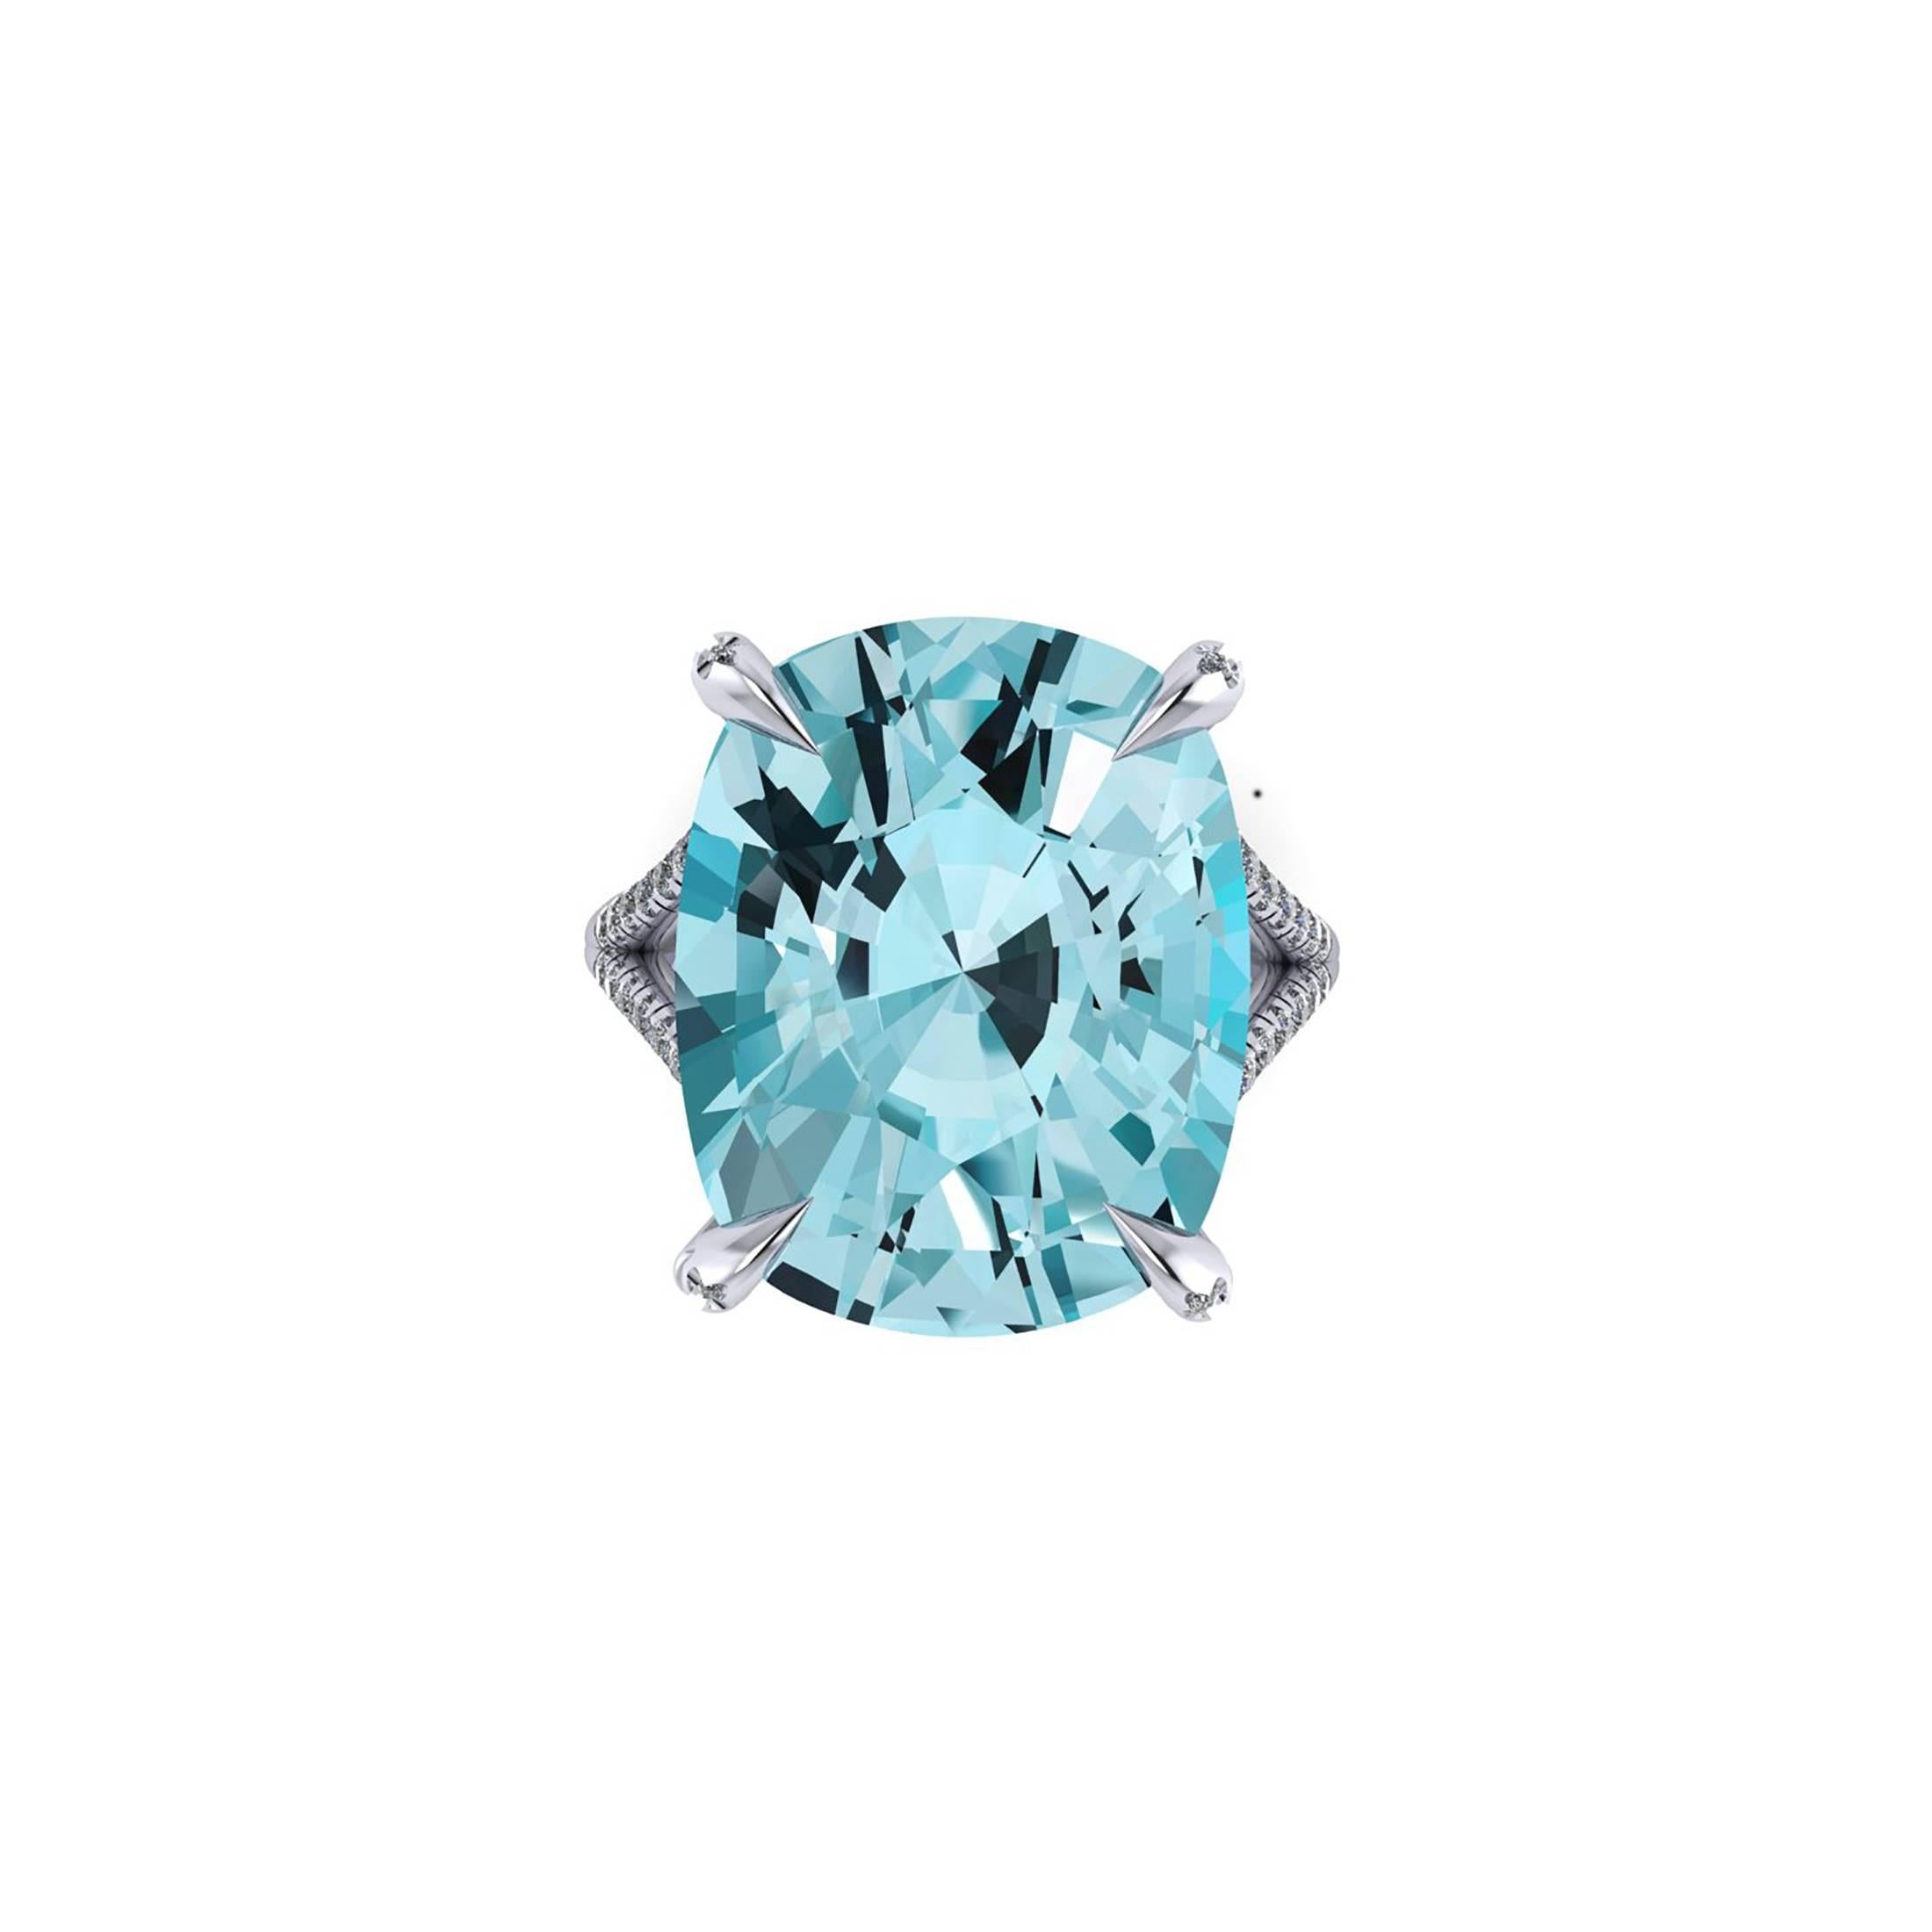 Ferrucci an approximate stunning 16.73 carat Aquamarine, set in a uniquely designed 18k white gold ring by master jeweler Francesco Ferrucci, with white bright diamonds of 0.50 carats to enlight a splendid blue mineral.
Entirely made in New York